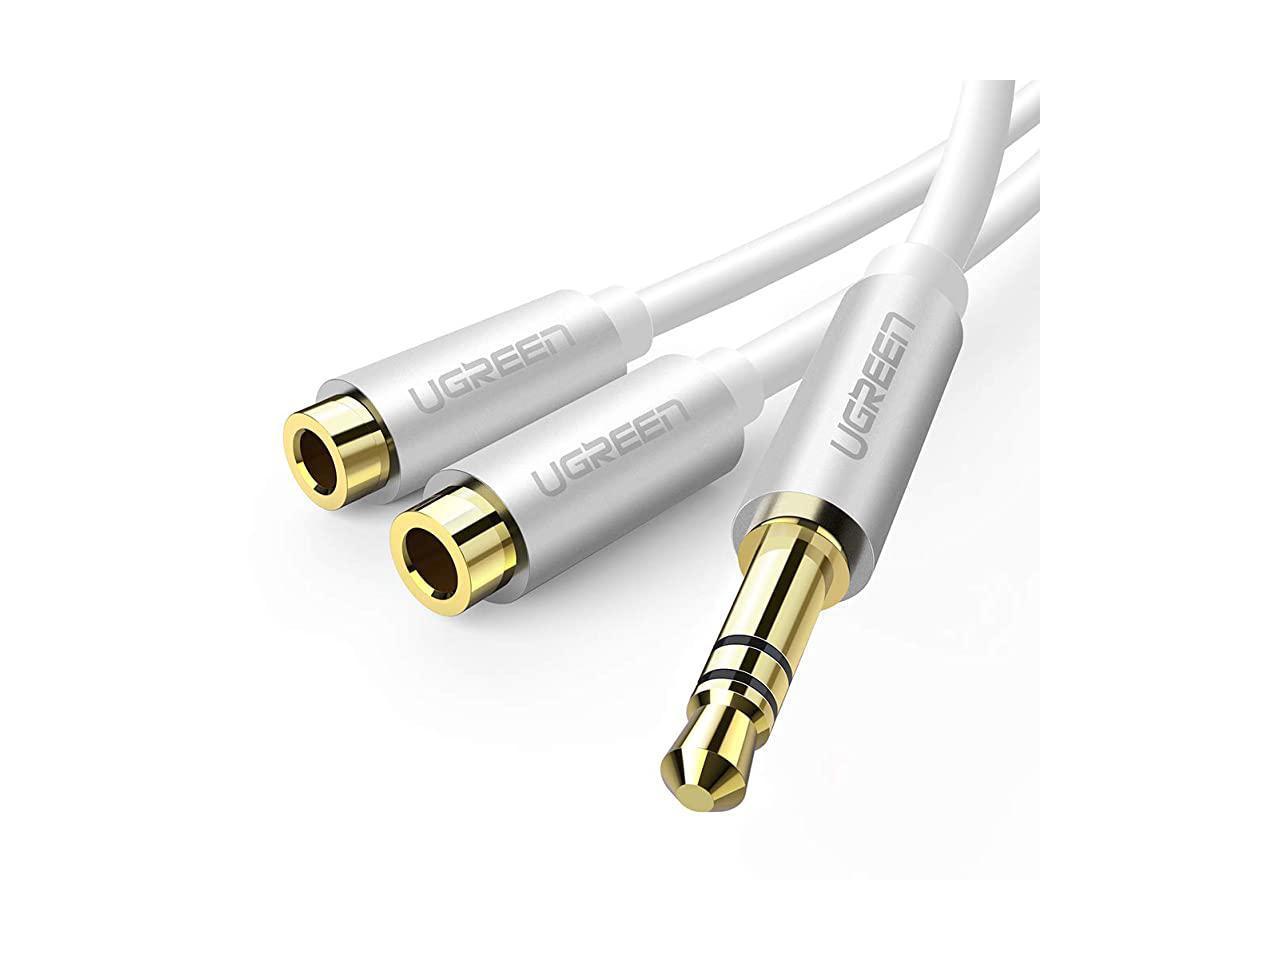 UGREEN Audio Splitter 20CM Smartphones 3.5mm Speaker and Headphone Adapter Aluminum Case Gold-plated Connector 3.5mm Stereo Y Earphone Splitter Cable Compatible for iPhone Samsung Mp3 Tablet